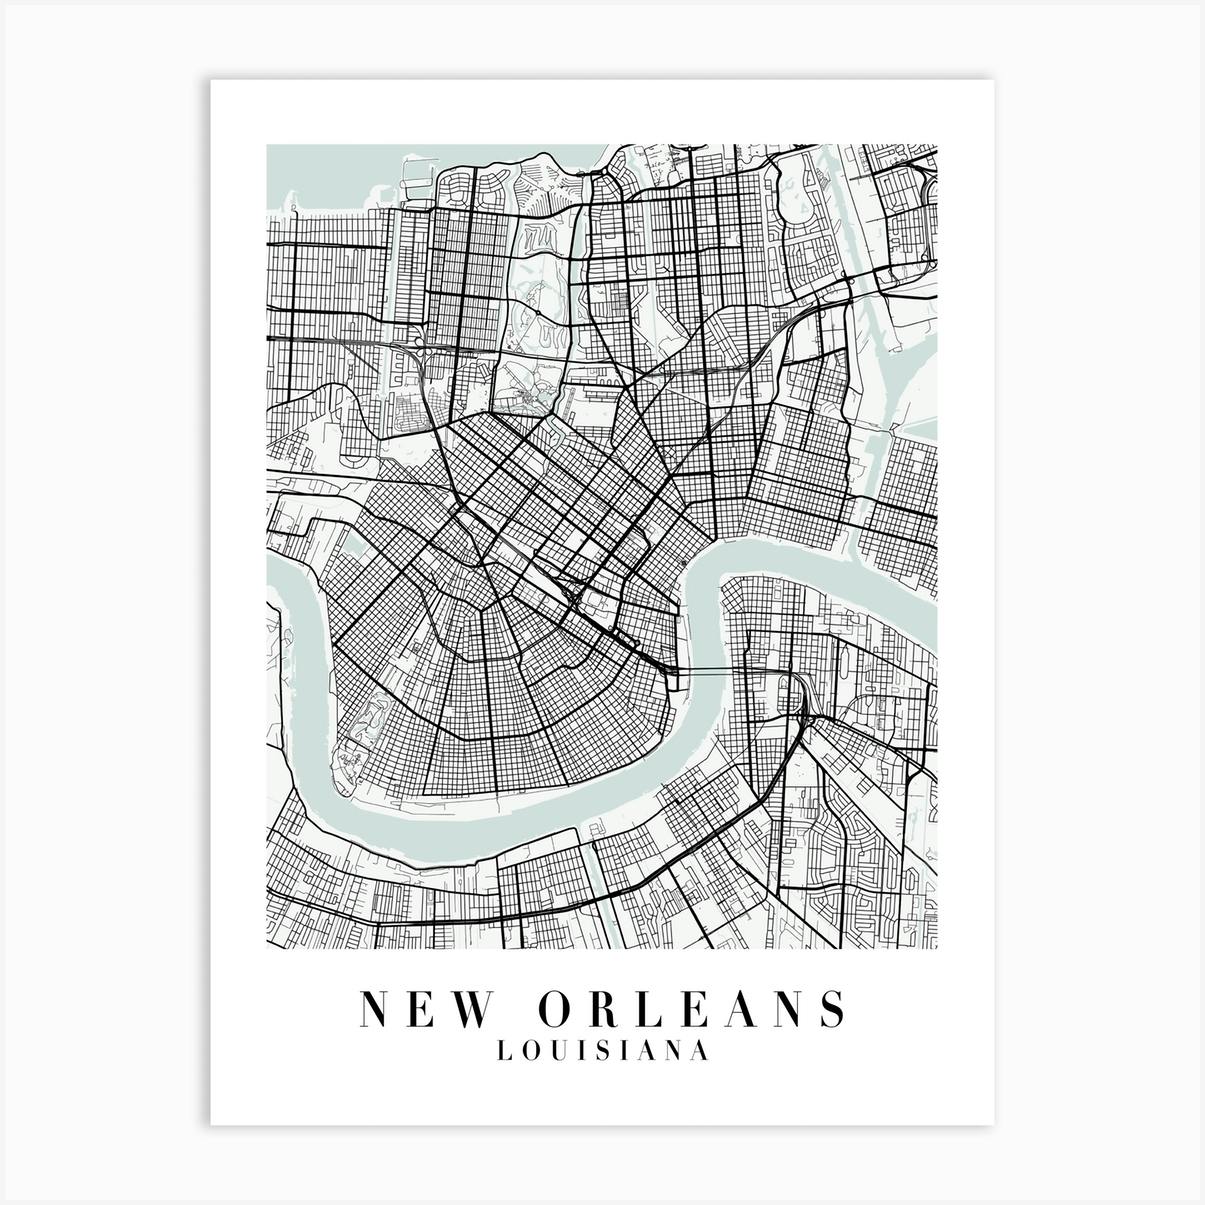 Louisiana New Orleans Unframed Art Print Colorful Street Map Poster